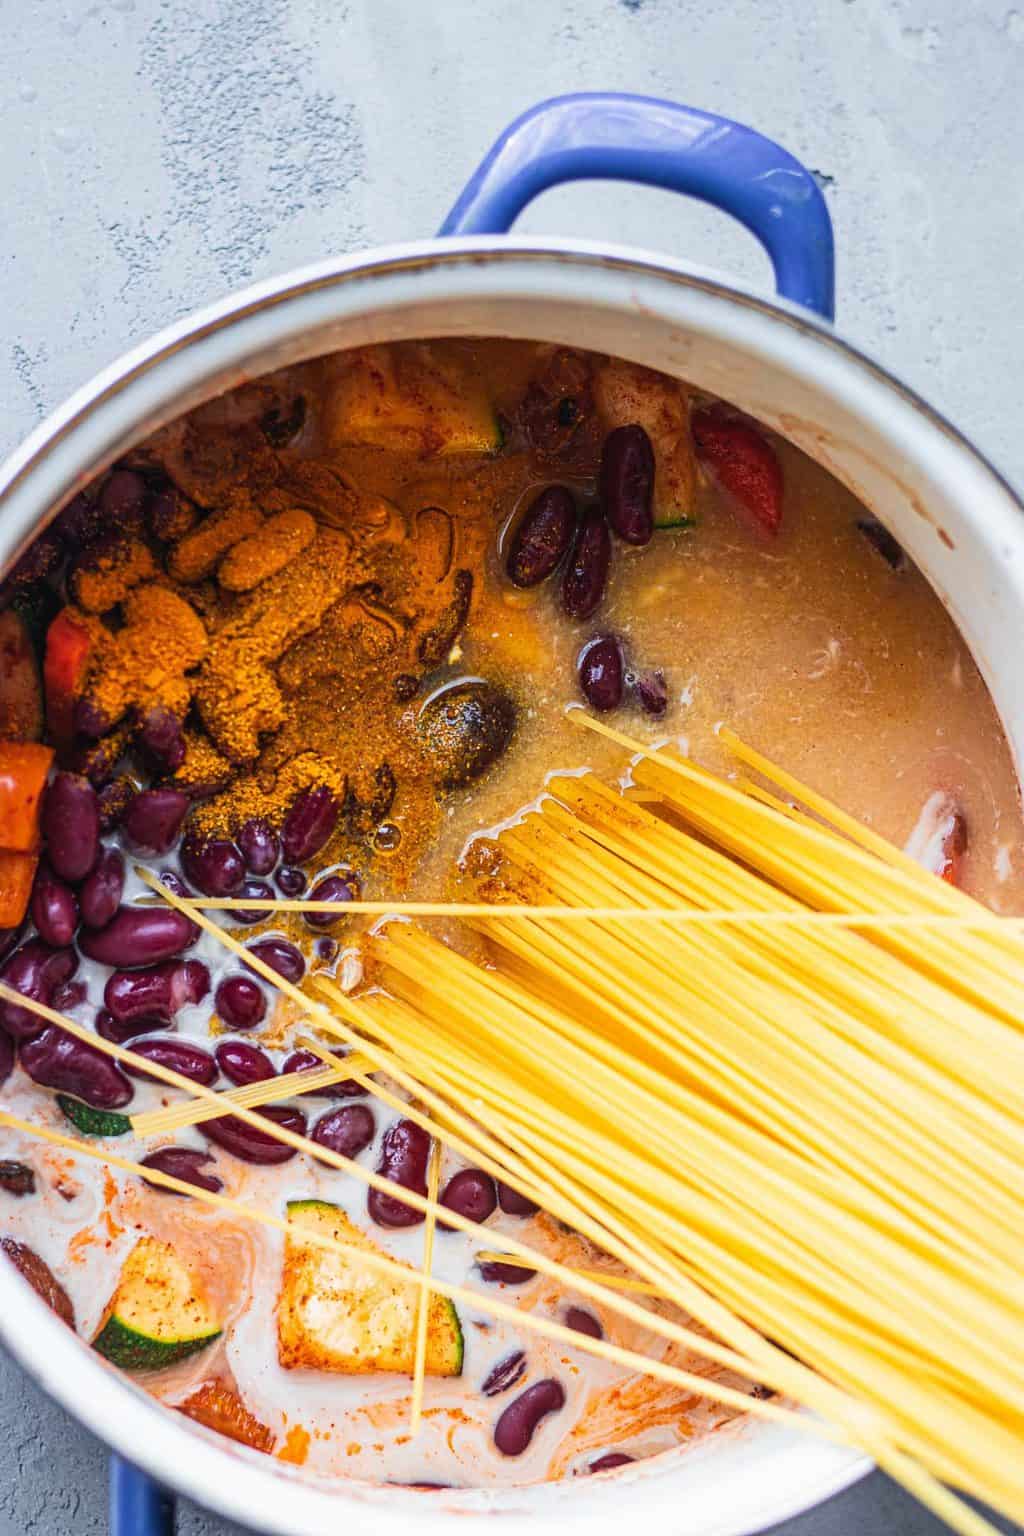 Spaghetti in a saucepan with kidney beans